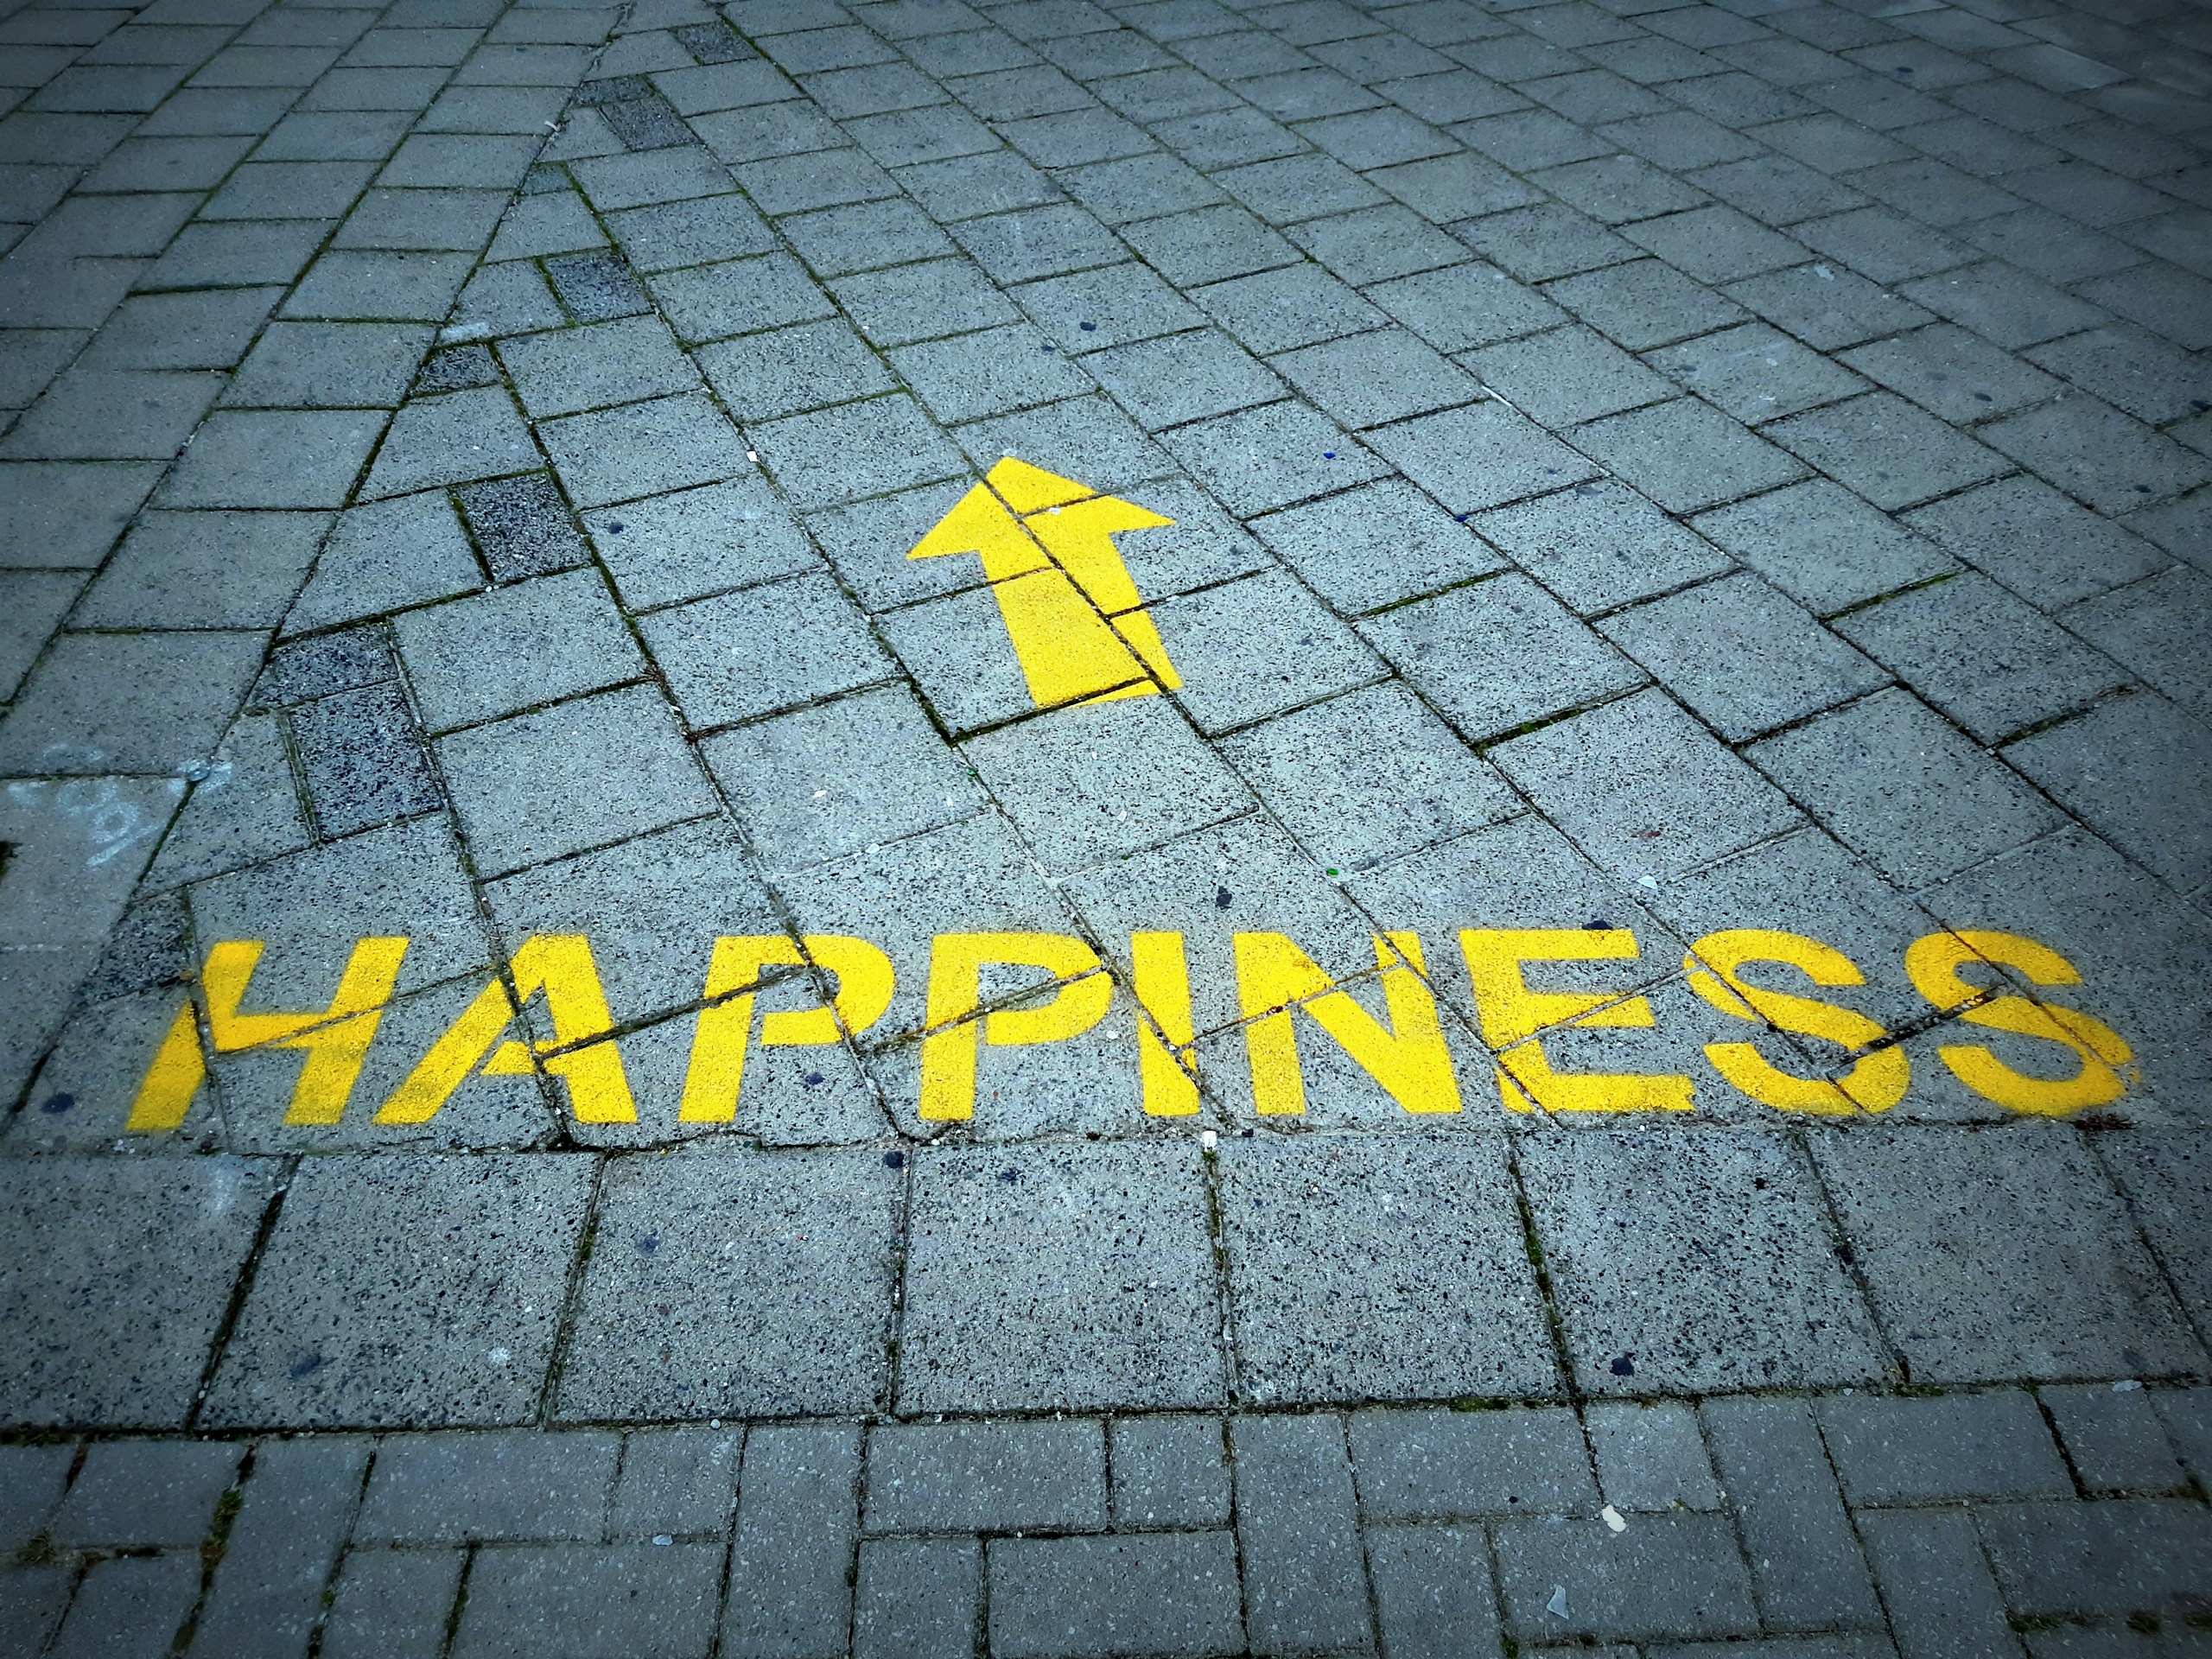 Happiness sign painted on the pavement